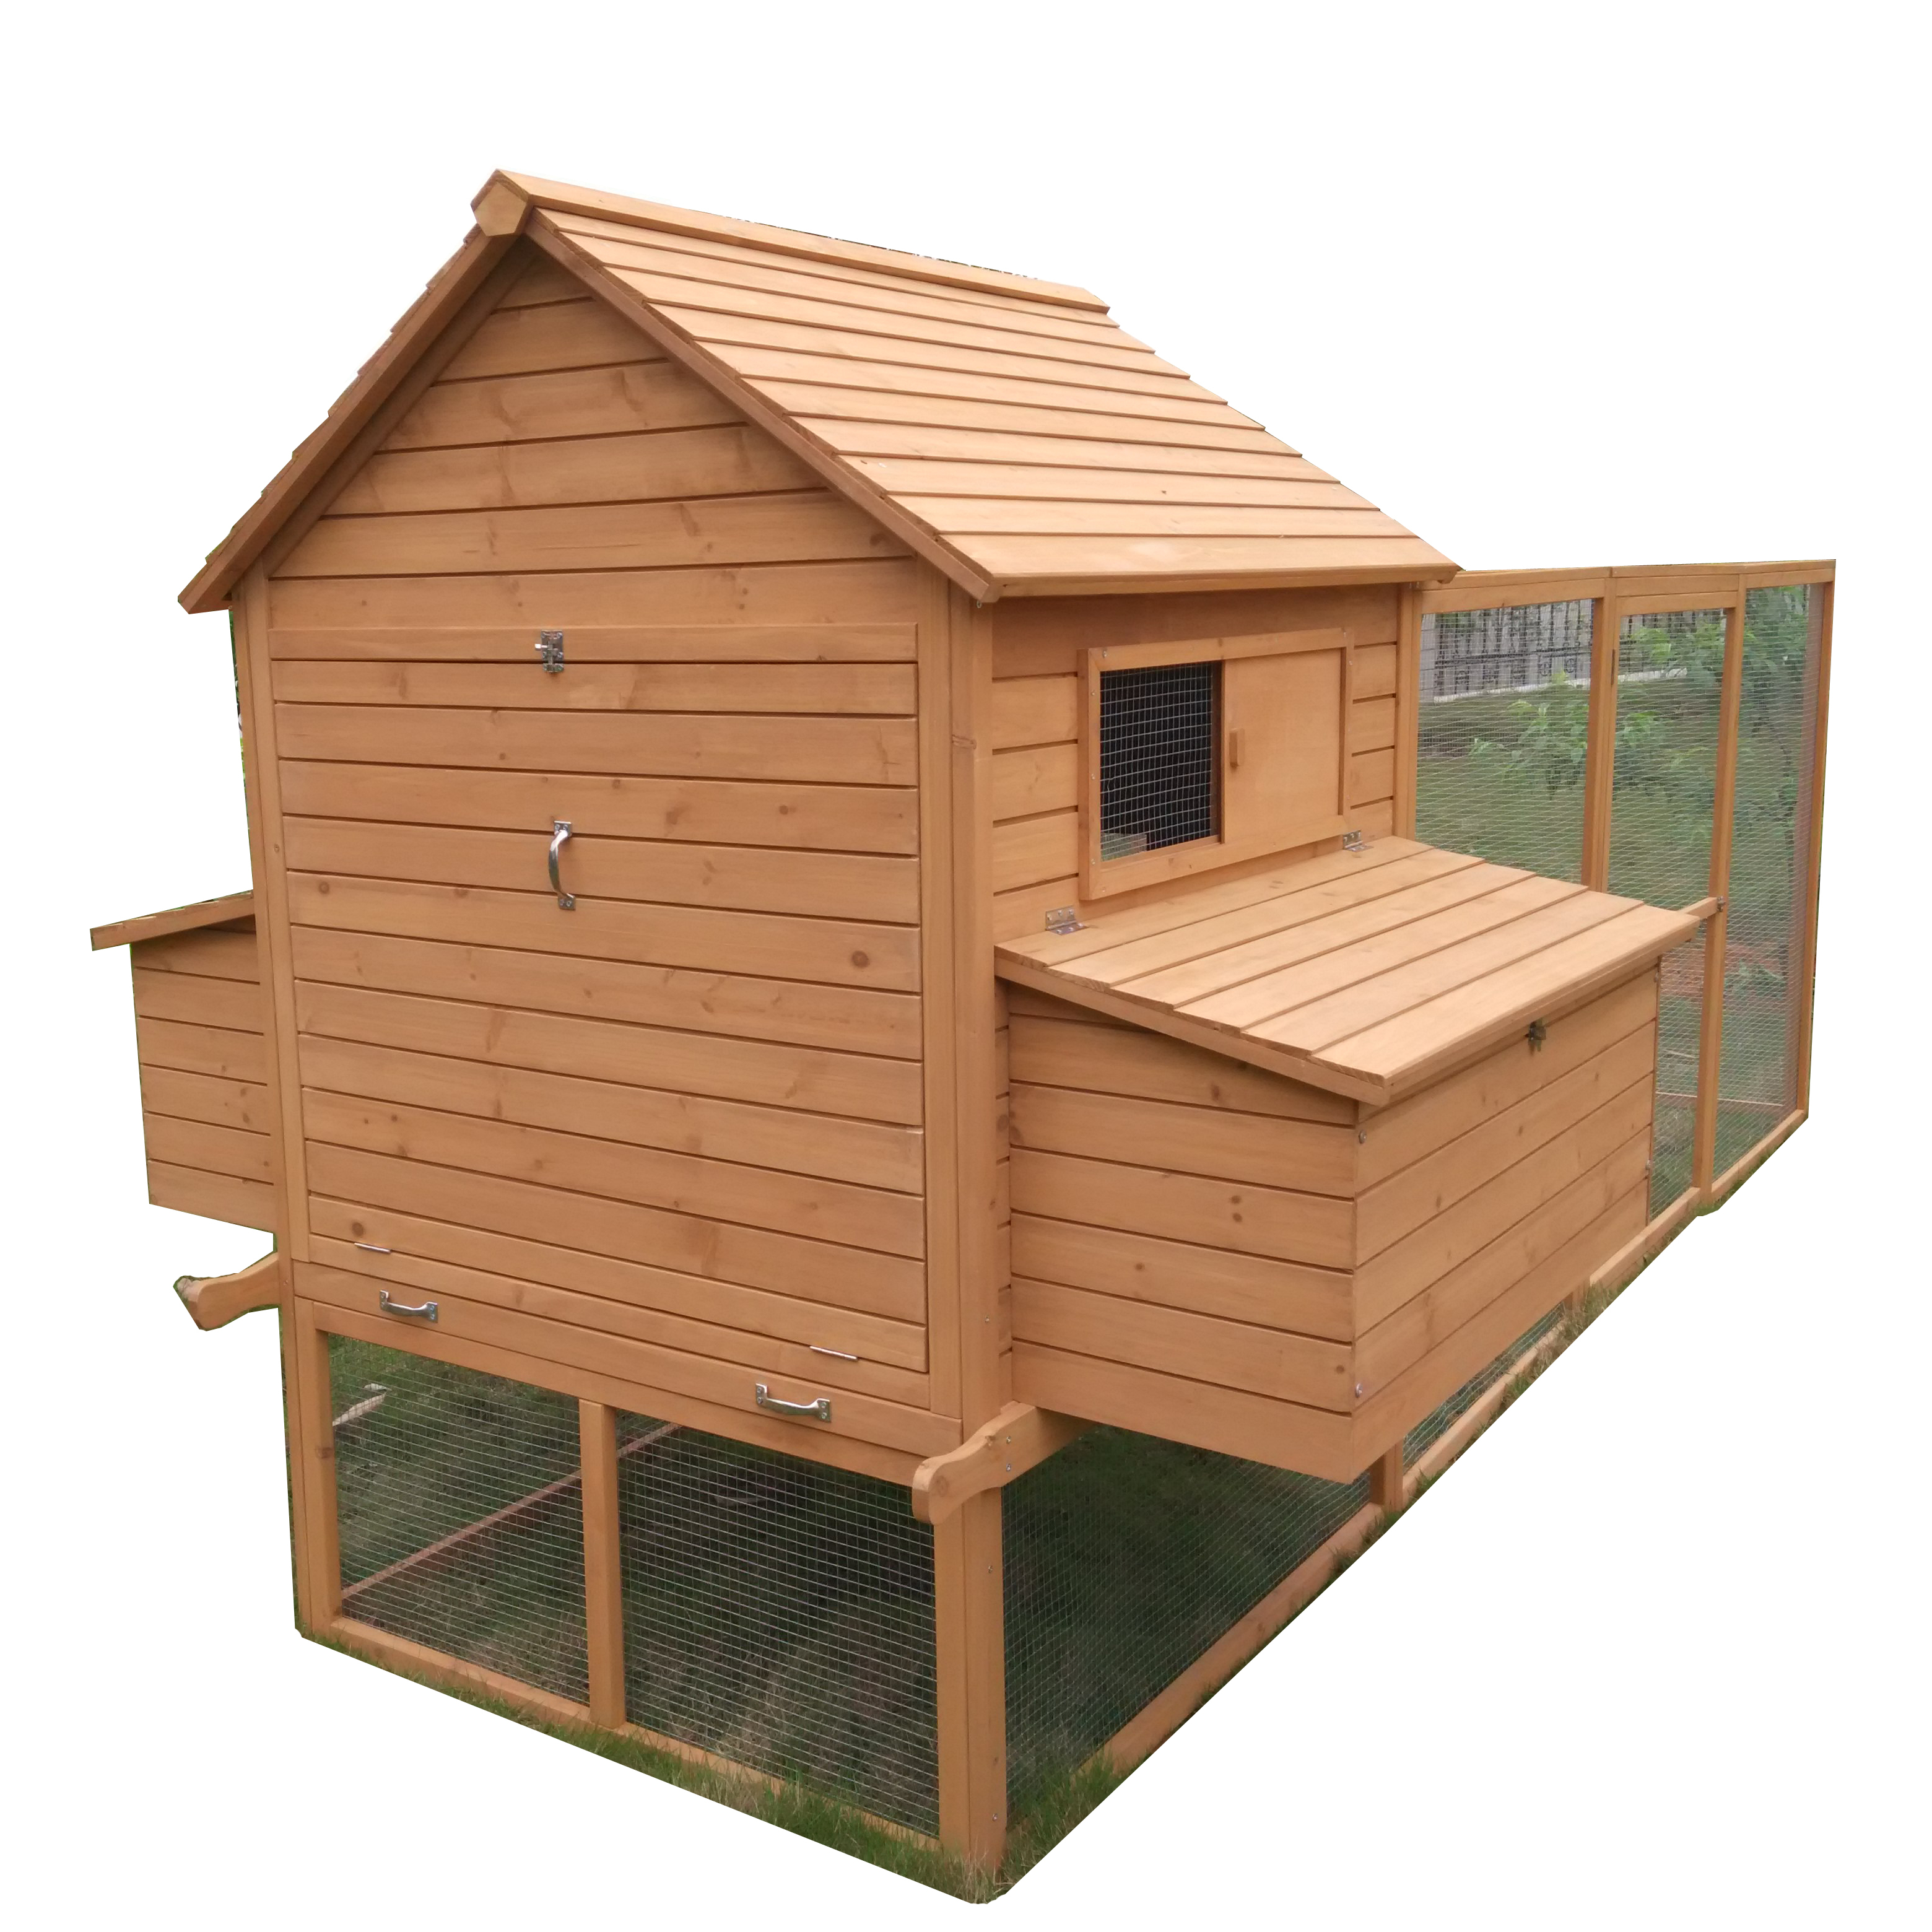 Handmade Large Wooden Enclosure mobile tractor pet cages Outdoor Raised Leg Hen House Chicken Coop for layers